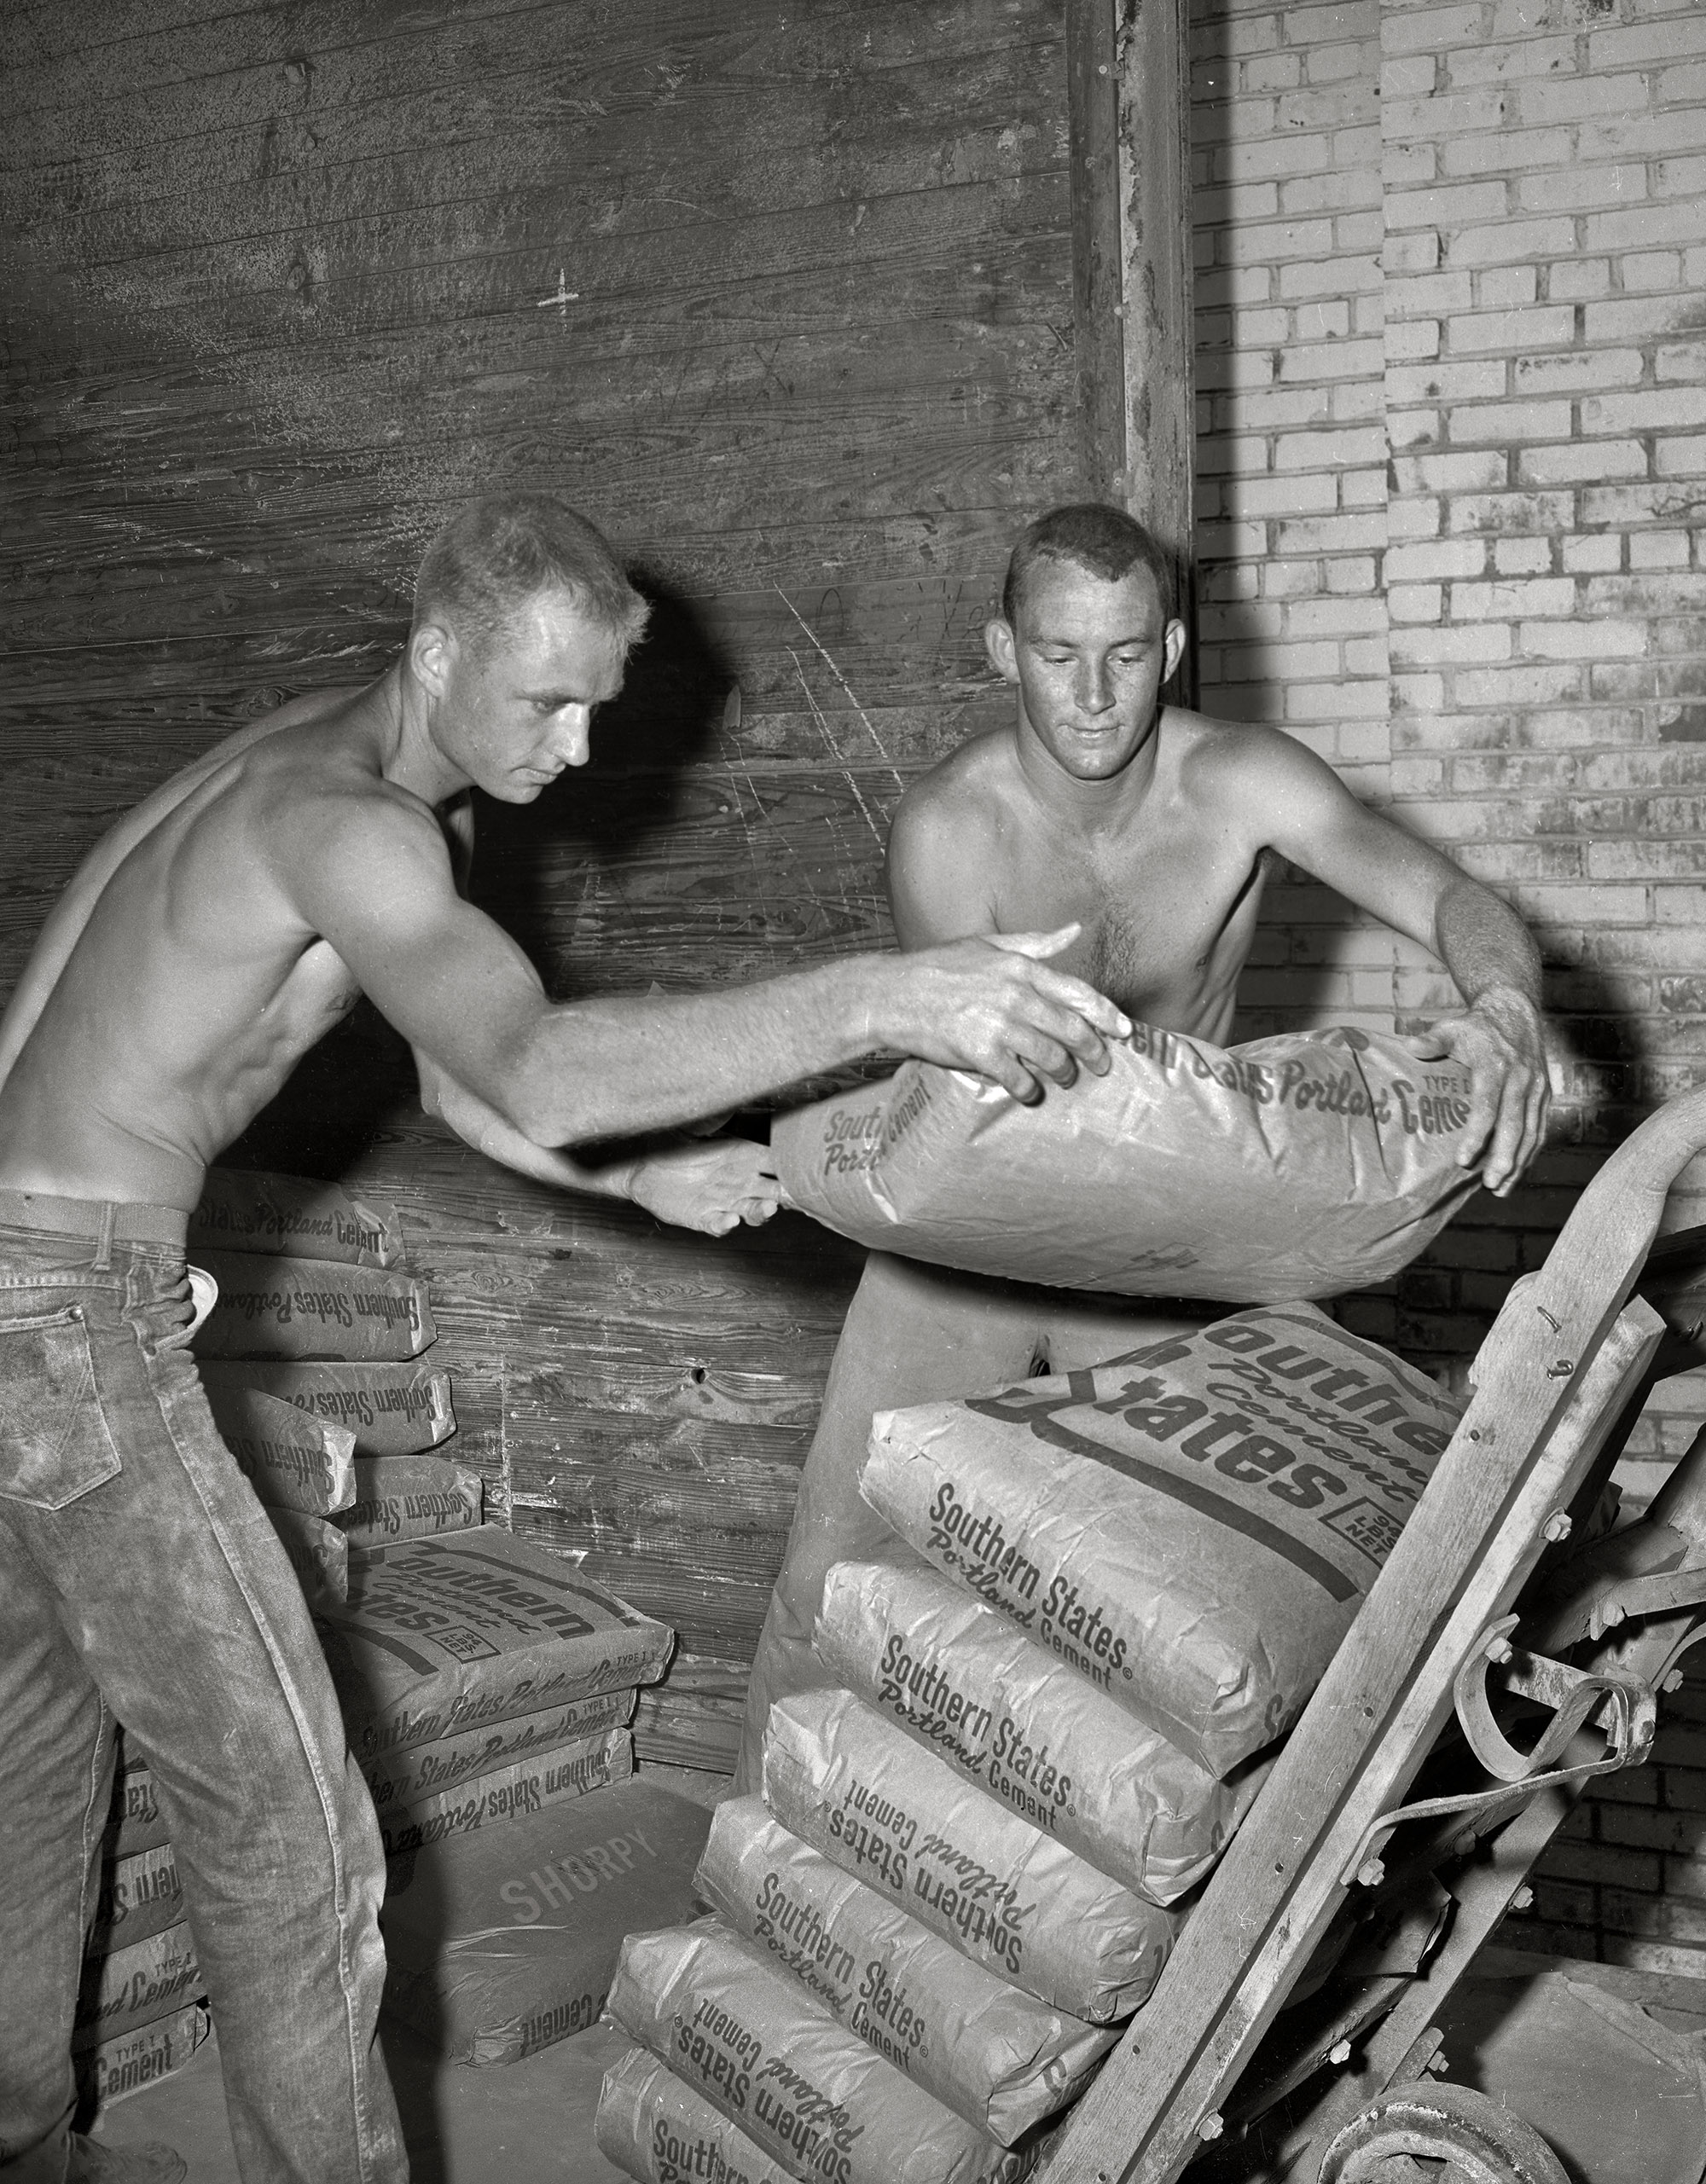 From around Columbus, Georgia, circa 1955 come the two strapping lads last seen here and here seven years ago, though they don't look a day older. Playing catch with 94-pound sacks of cement must keep you young. 4x5 inch acetate negative. View full size.